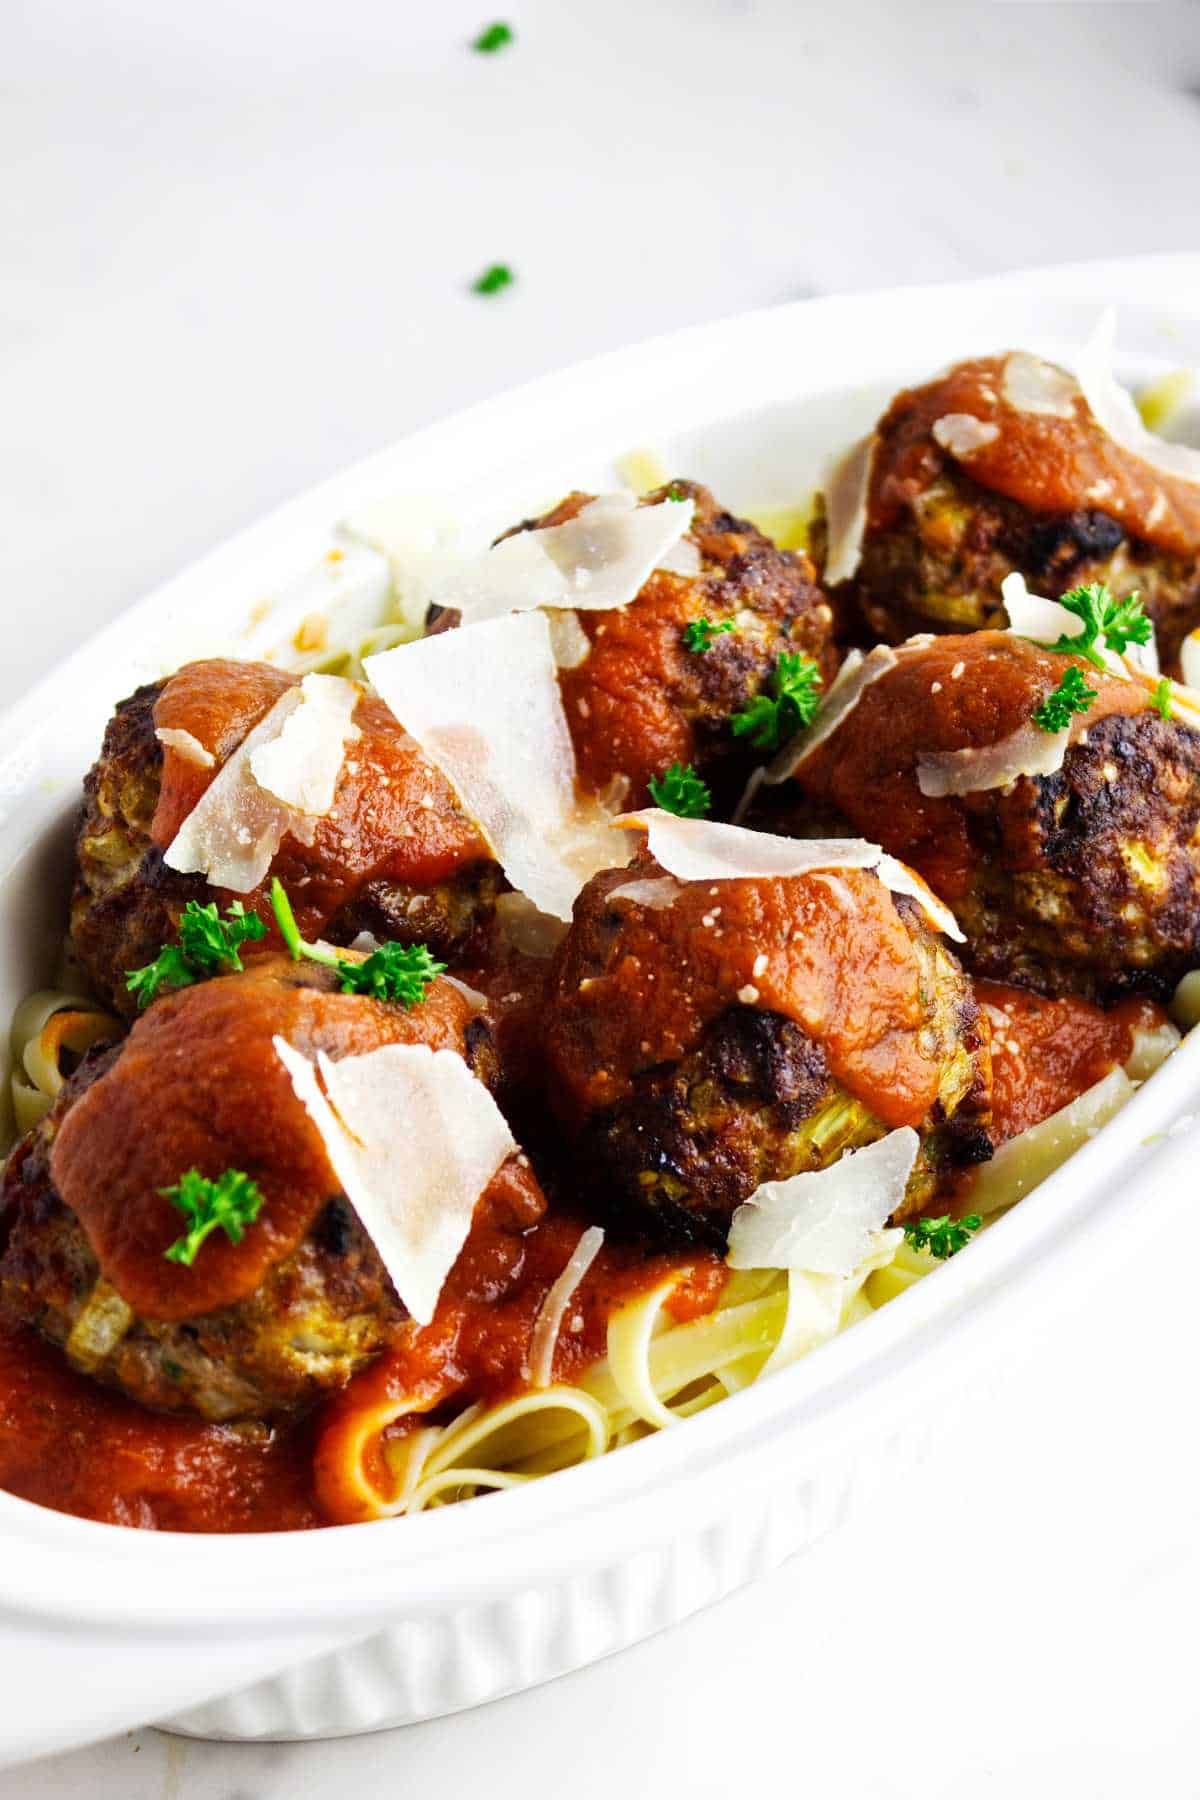 Casserole of meat balls on pasta and covered with spaghetti sauce and cheese shavings.